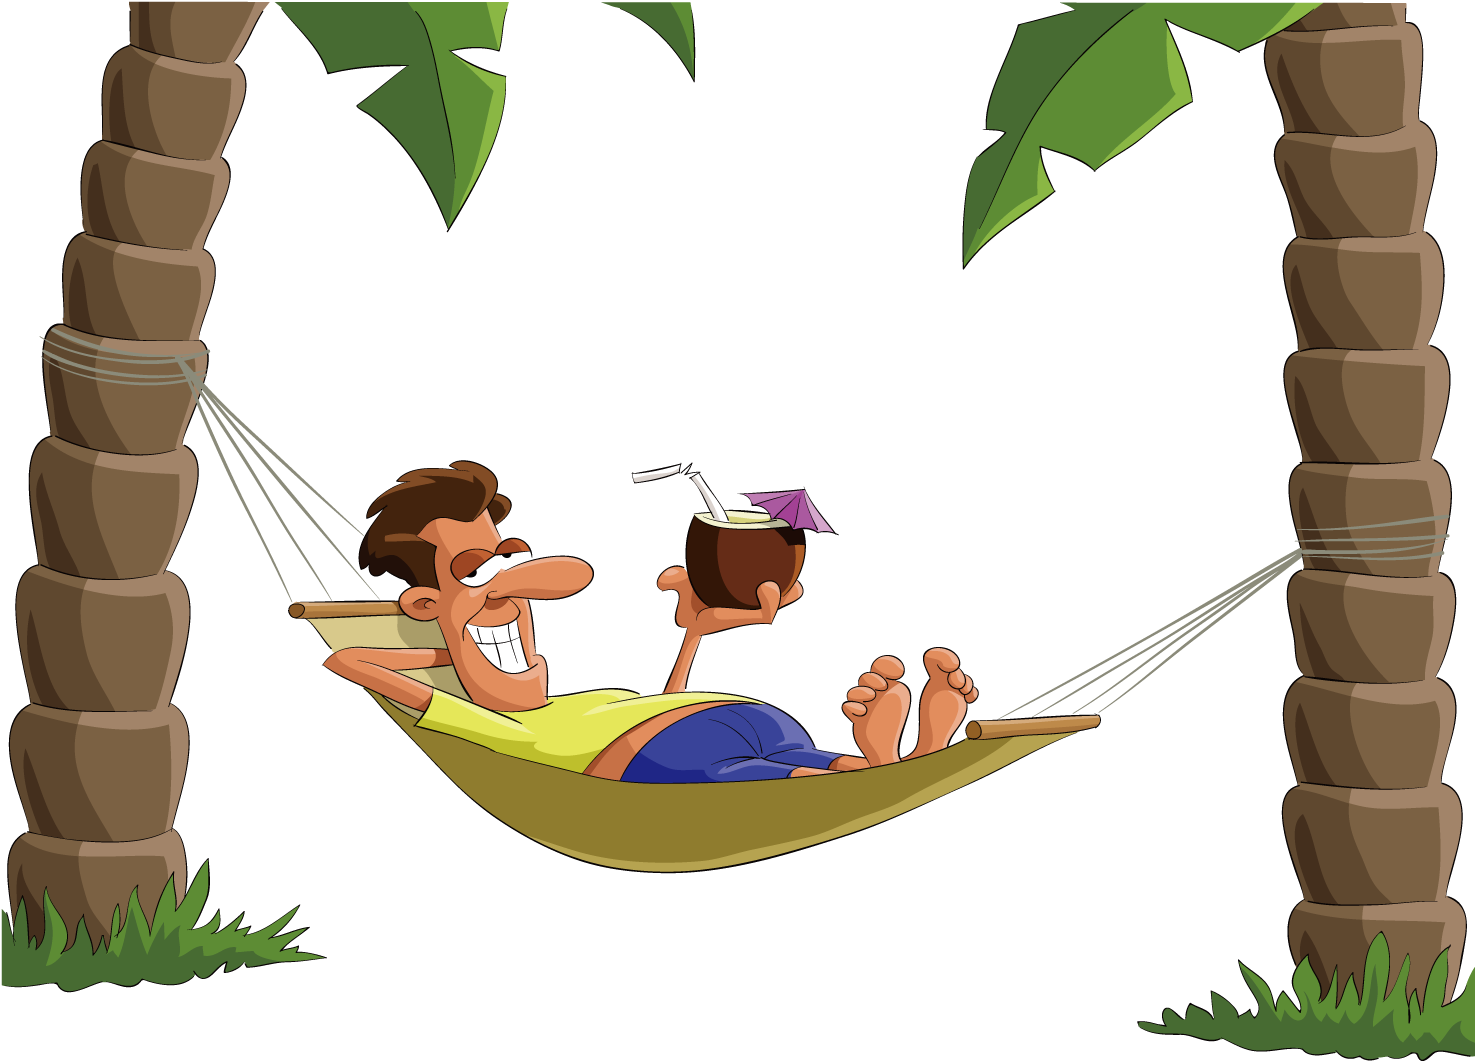 Download and share clipart about Lying On Top Of The Hammock Man - Lying On...